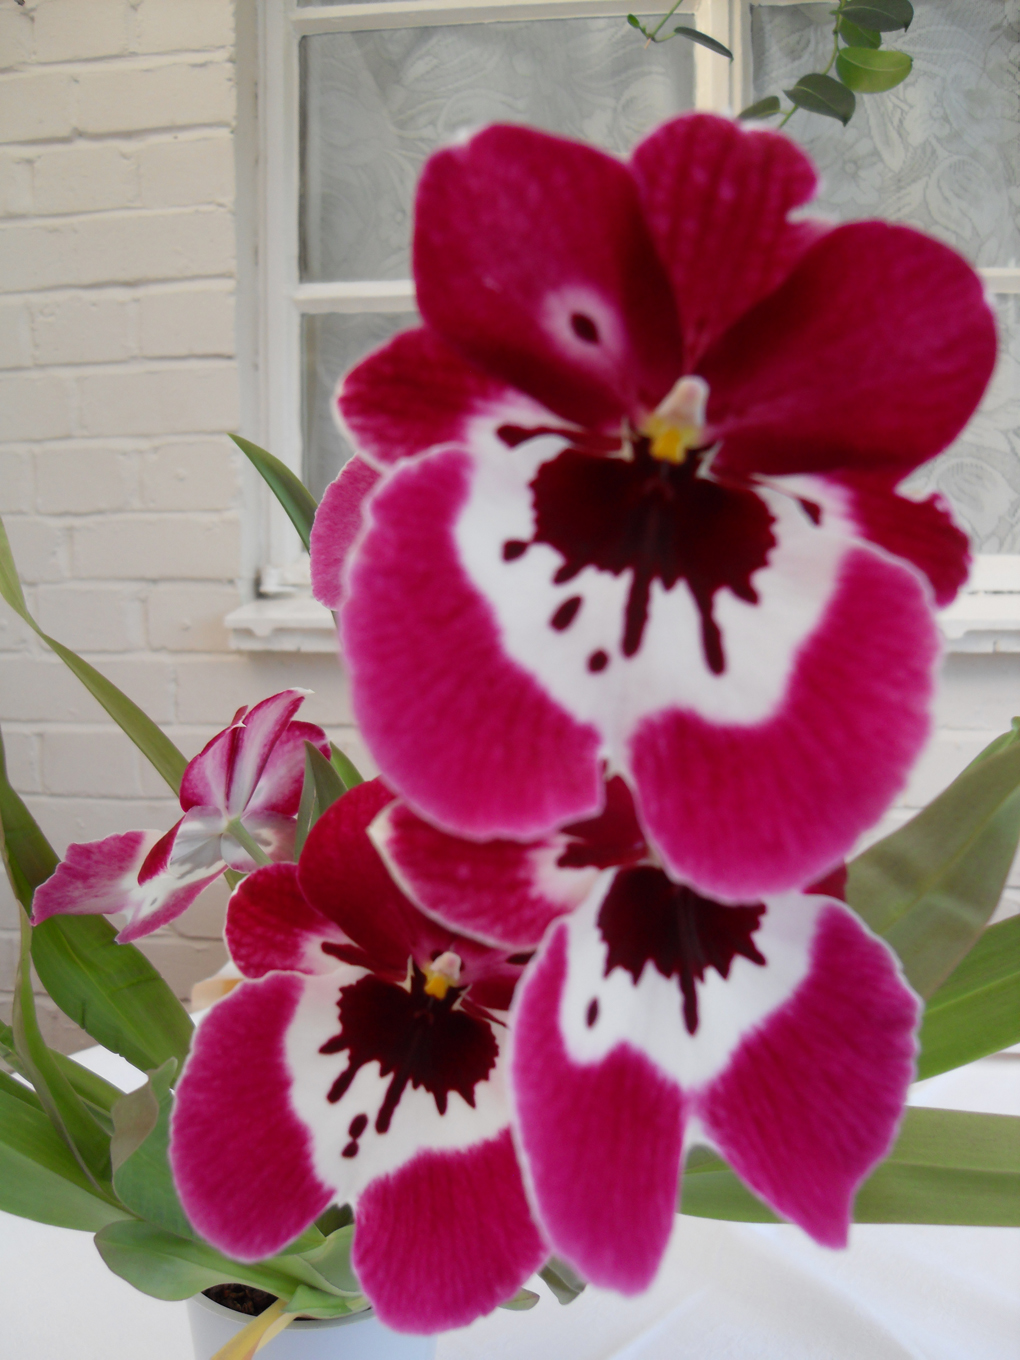 pink and purple orchid